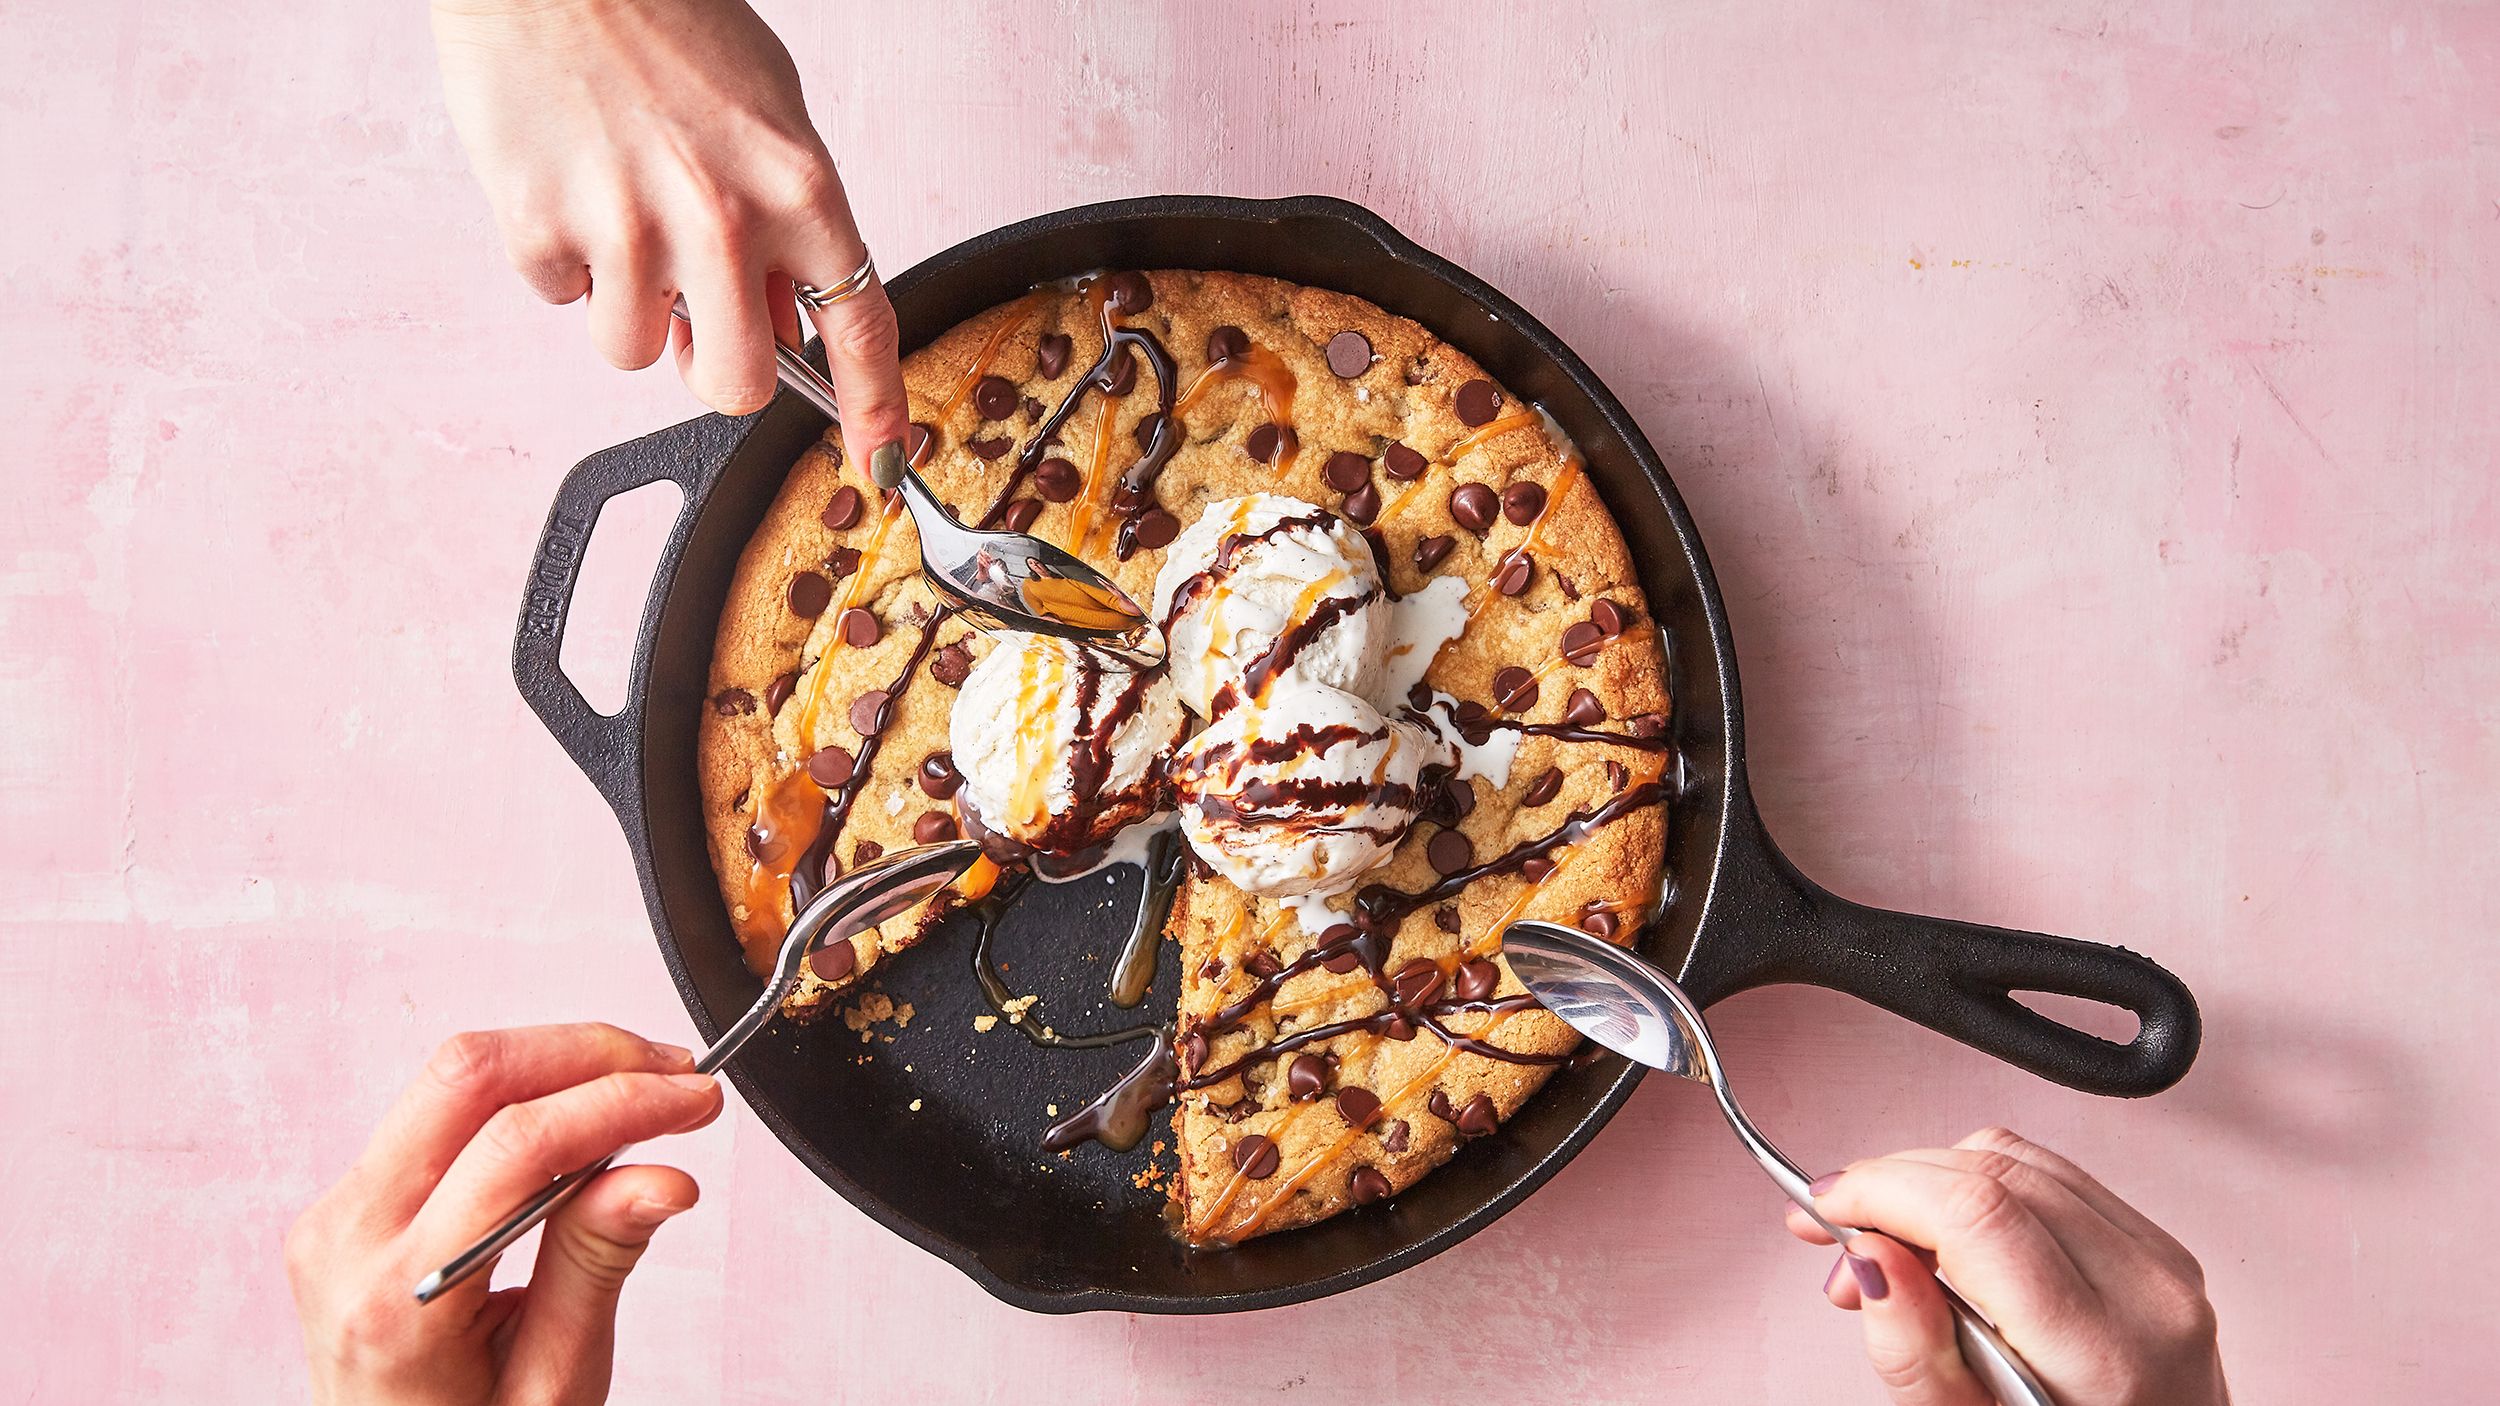 https://hips.hearstapps.com/hmg-prod/images/190201-skillet-chocolate-cookie-372-1549778851.jpg?crop=1xw:0.8435812837432514xh;center,top